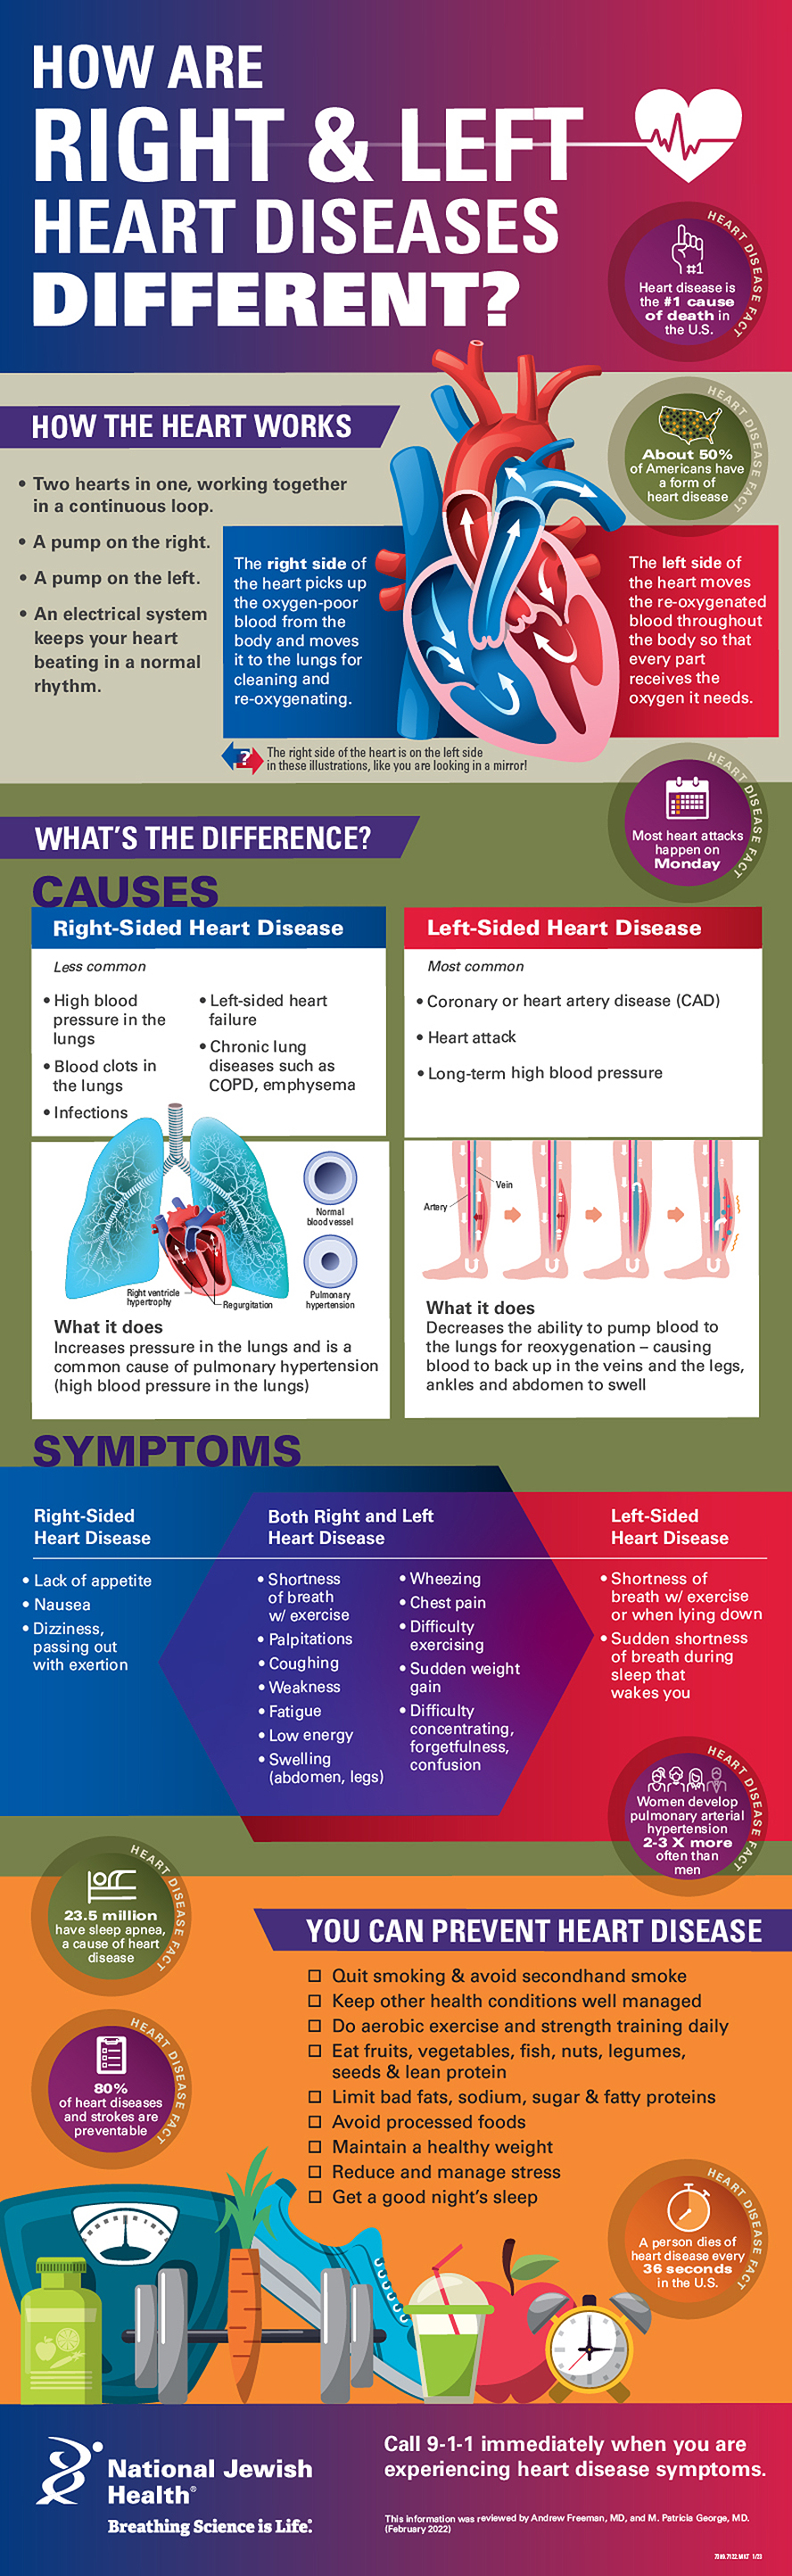 right vs left heart disease differences infographic